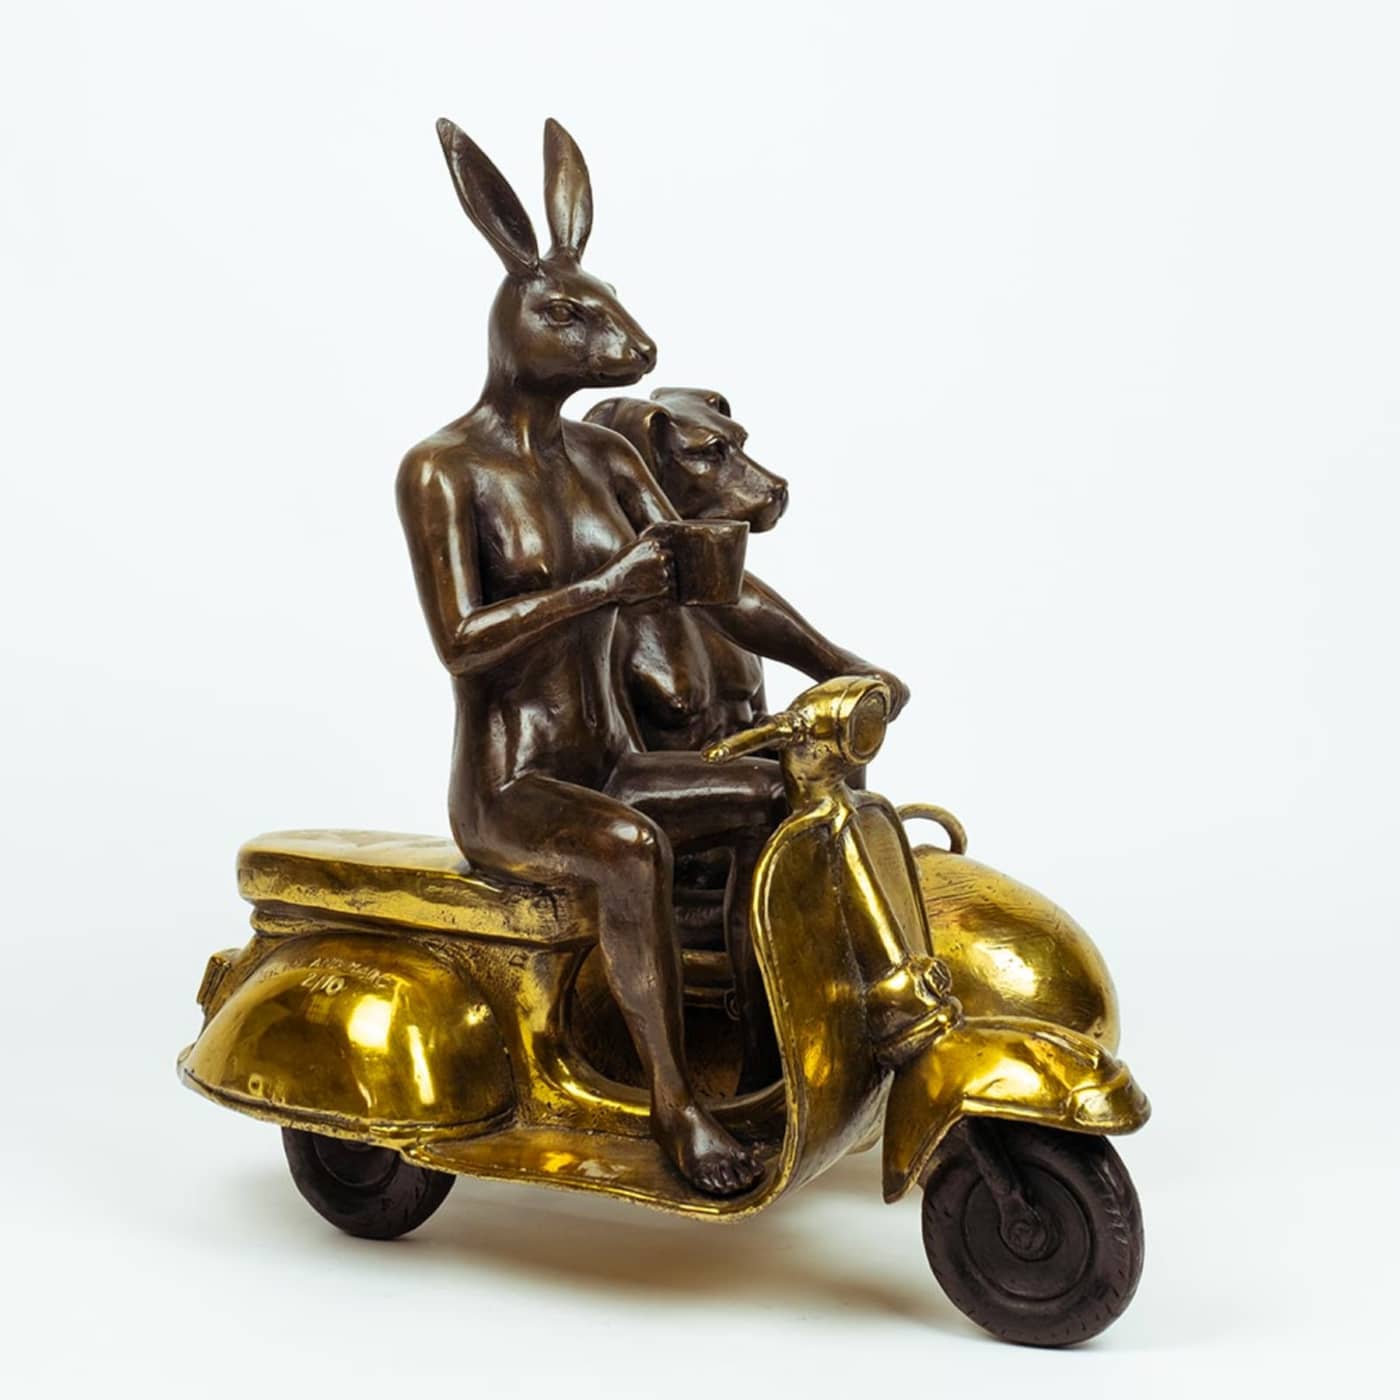 Gillie and Marc Sculpture (Bronze) ~ 'They Were Always Side by Side (Gold)' - Curate Art & Design Gallery Sorrento Mornington Peninsula Melbourne